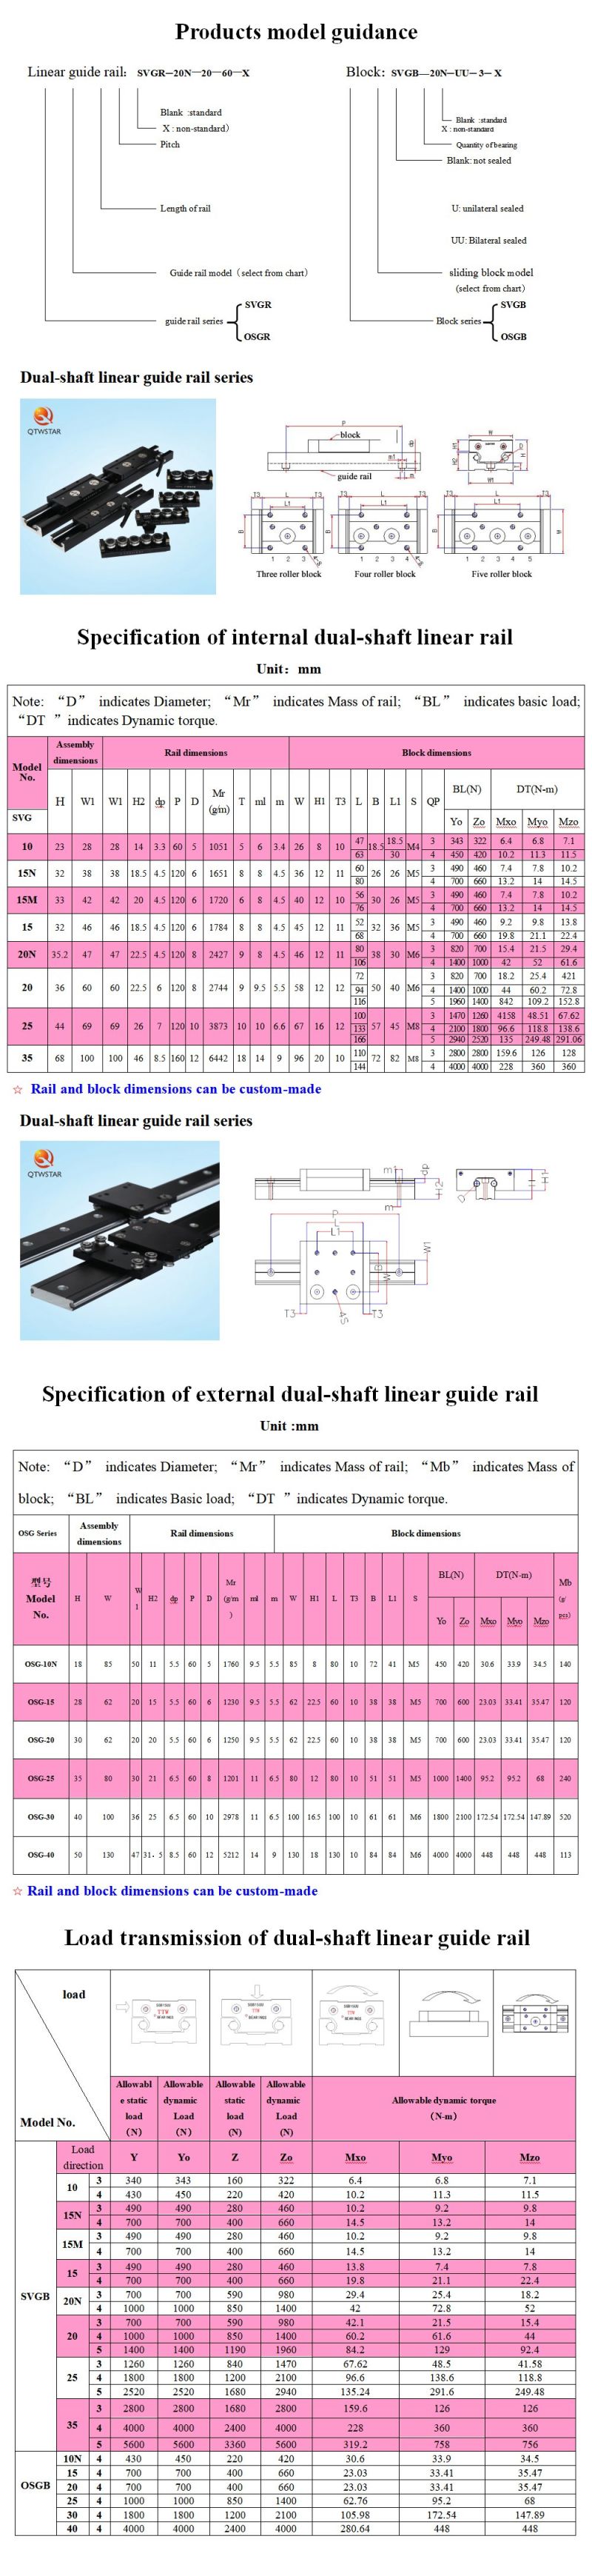 Miniature Stainless Steel Linear Guide, Linear Guide, Rolling Linear Guide